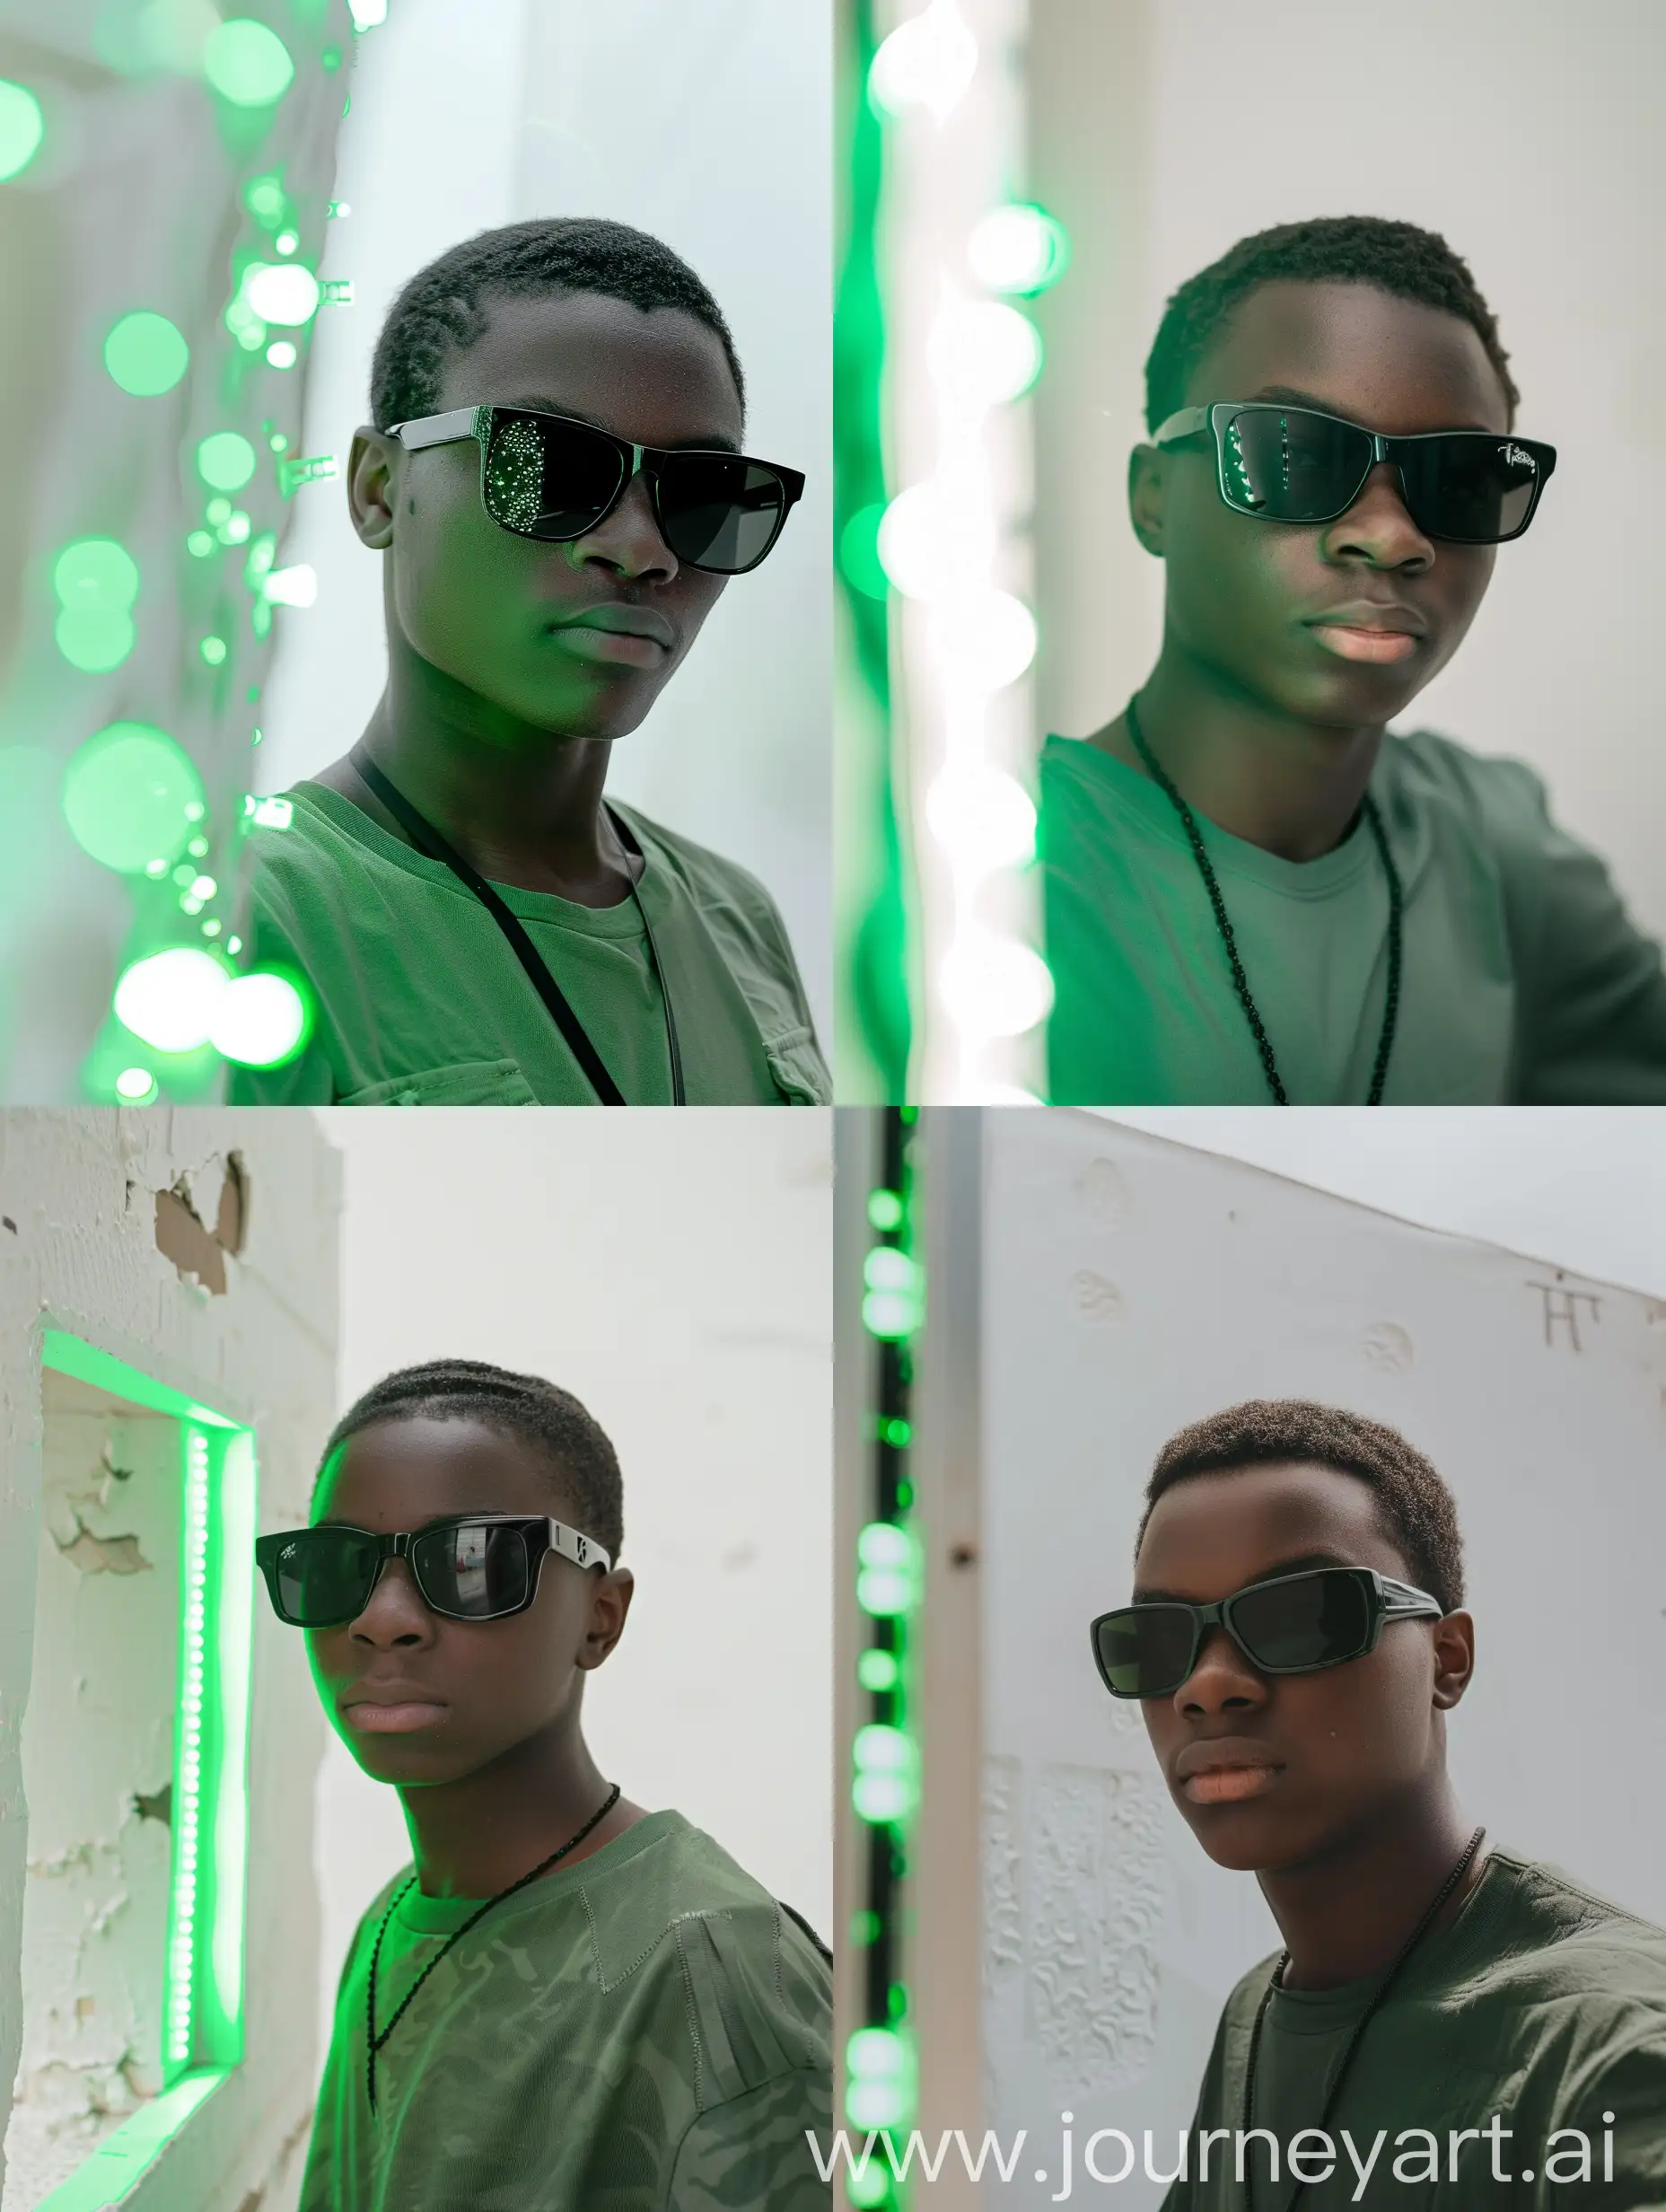 Aesthetic Instagram selfie of a young African-American man wearing black sunglasses and a green shirt is standing in front of a white wall with green led lights on the left side of the image. The man is looking at the camera with a neutral expression. He is wearing a black necklace. The background is blurry.  [African-American man, portrait, neutral expression], [realism, photorealistic, high-quality, detailed], [white wall, green led lights]